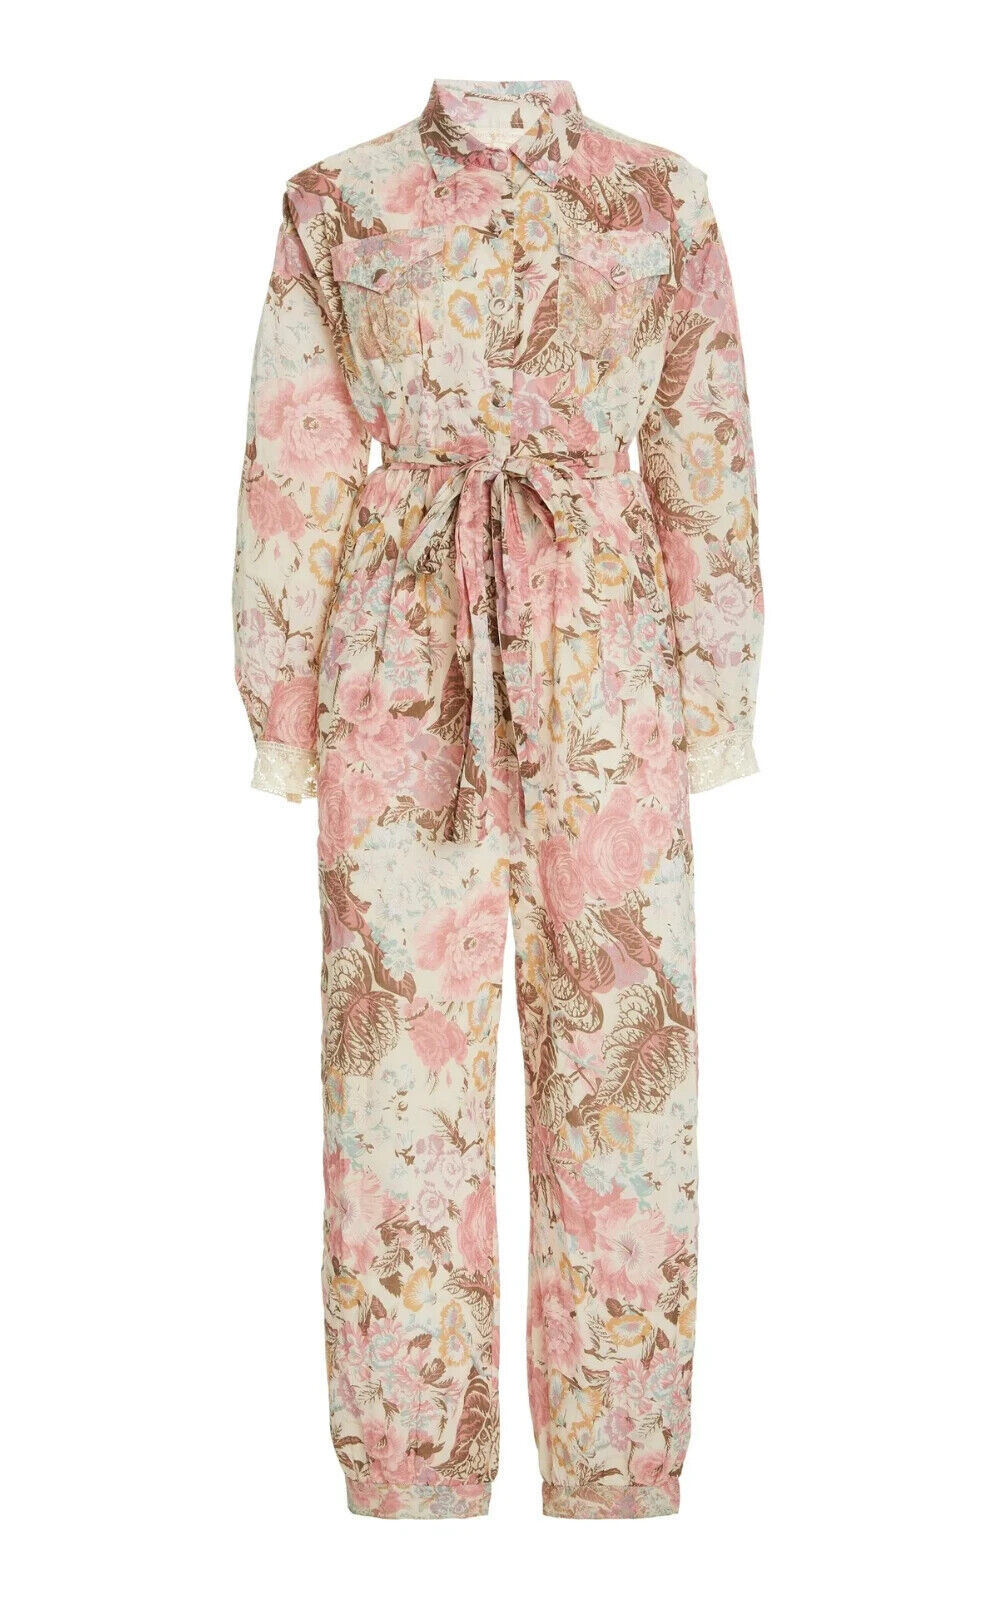 Primary image for NWT LoveShackFancy Morellia Jumpsuit in Dew Drop Floral Cotton 1-Piece XS $395